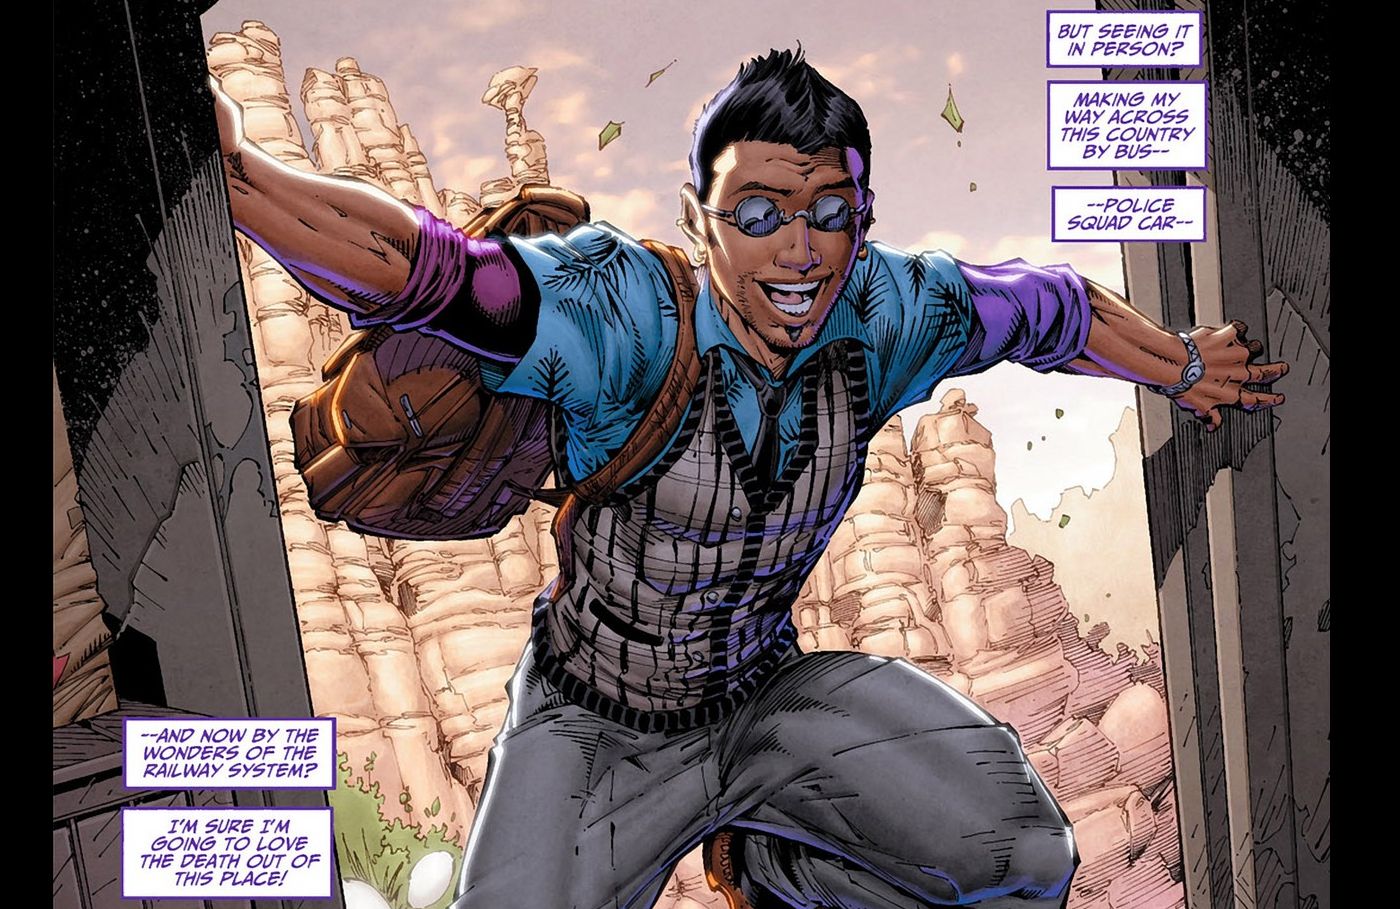 Comic book panel: Bunker's 2011 debut shows him excited to arrive in America after hopping aboard a train.